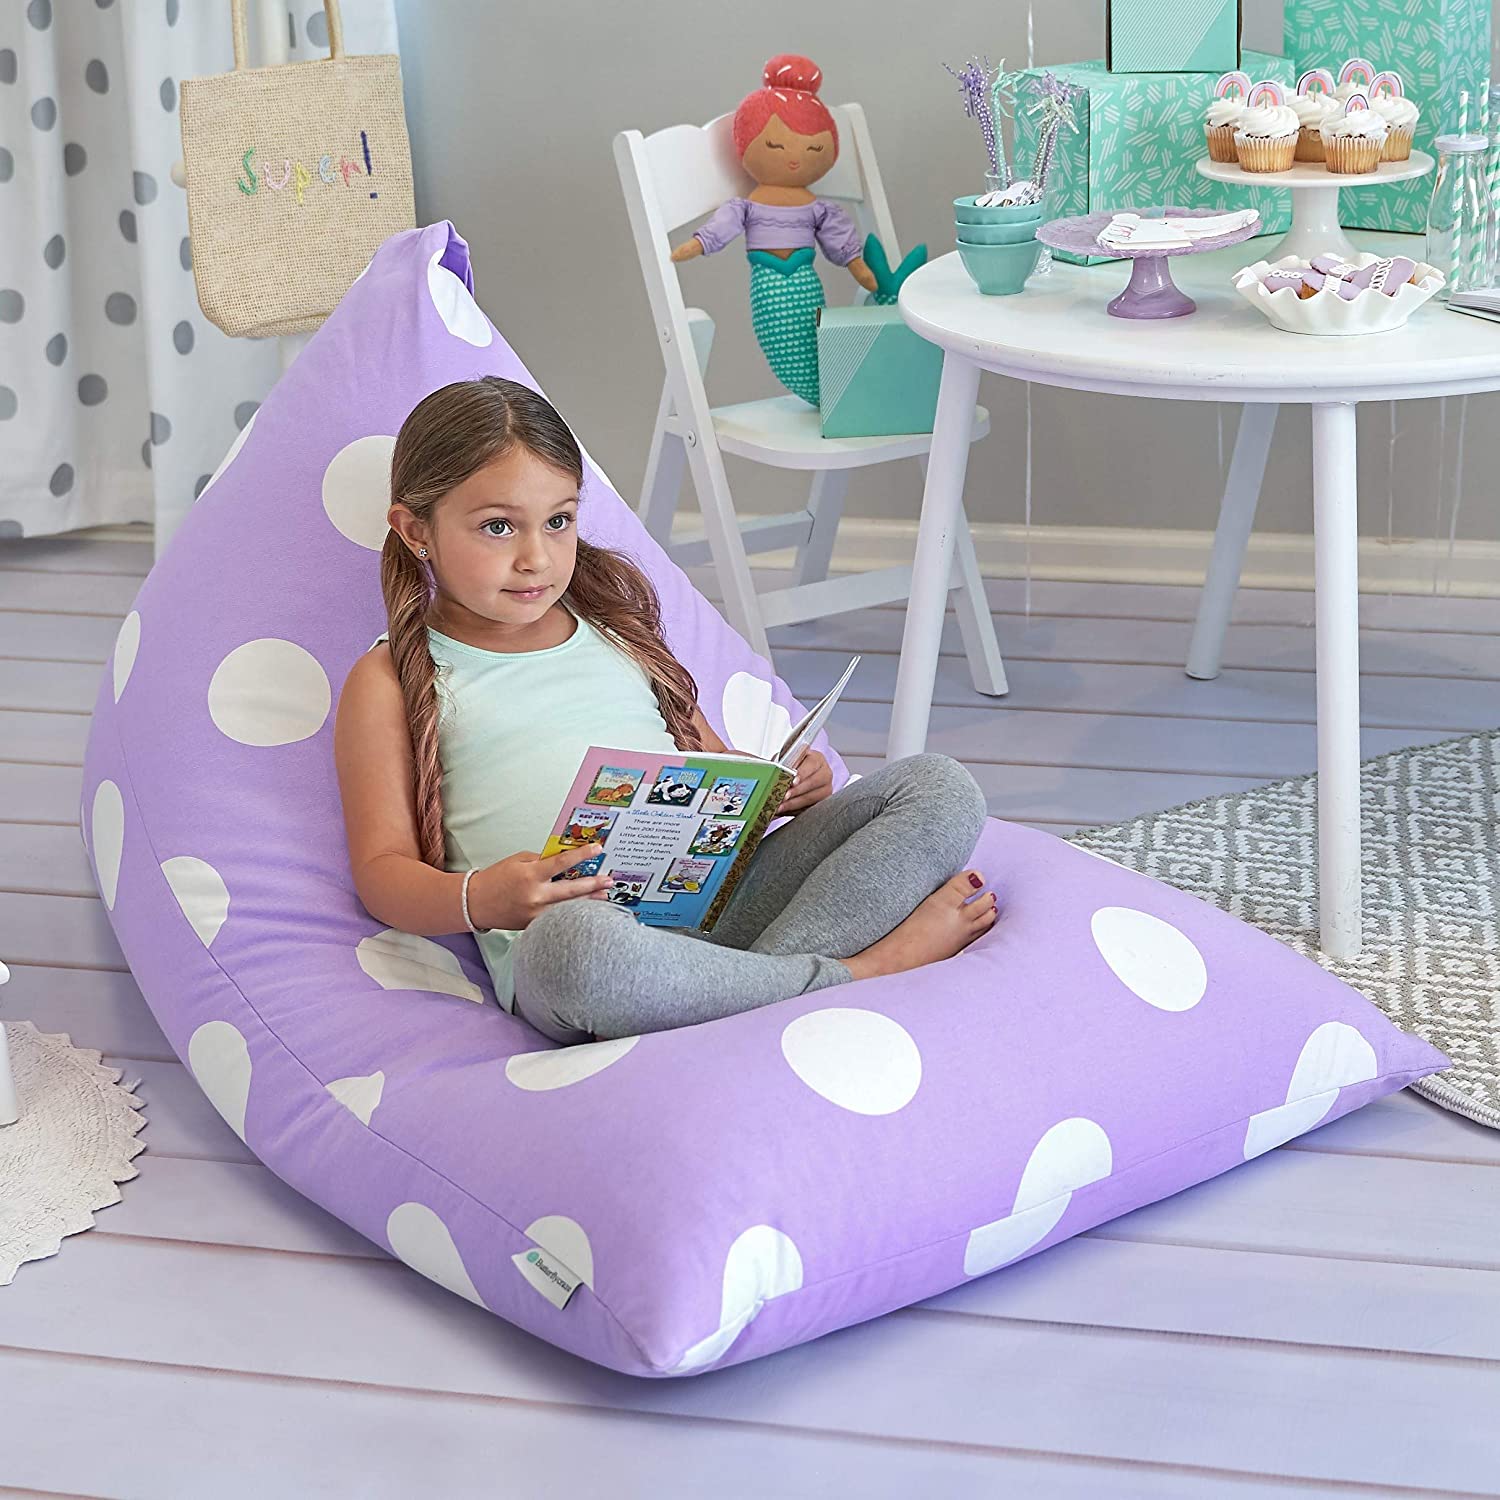 Butterfly Craze Bean Bag Chair Cover Price Drop